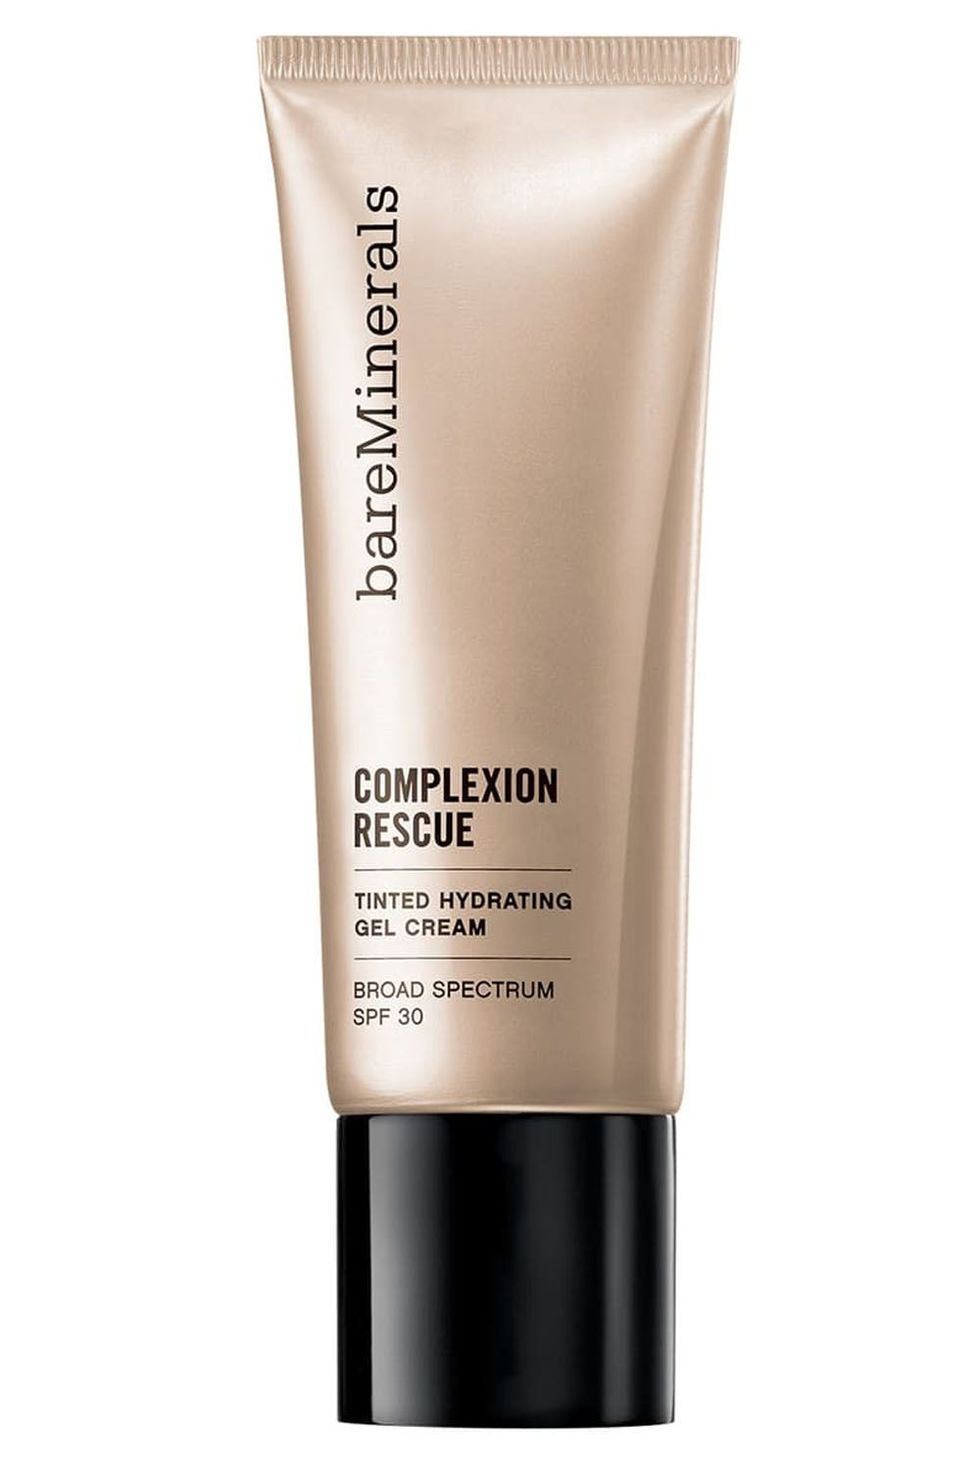 Bareminerals Complexion Rescue Tinted Hydrating Gel Cream Broad Spectrum SPF 30